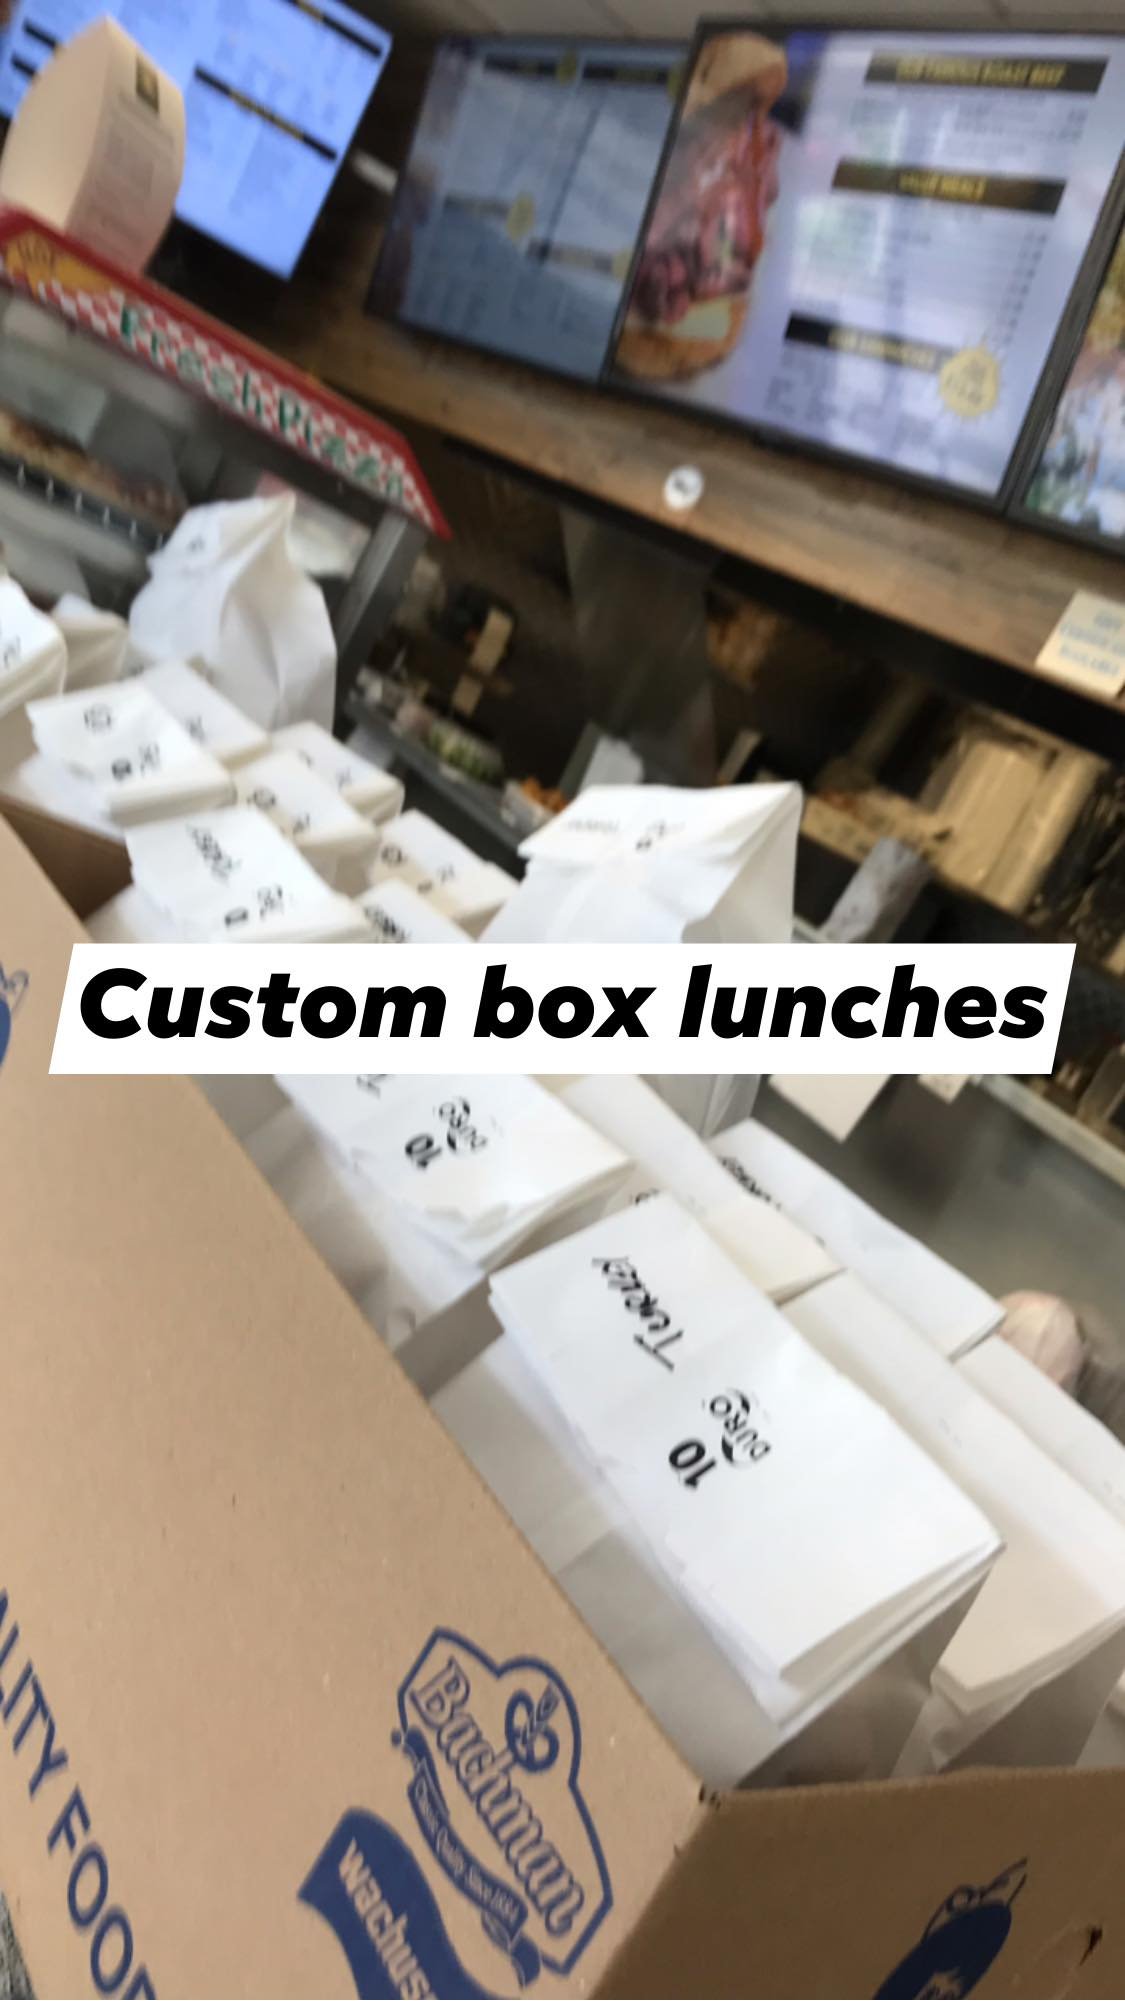 Box lunches